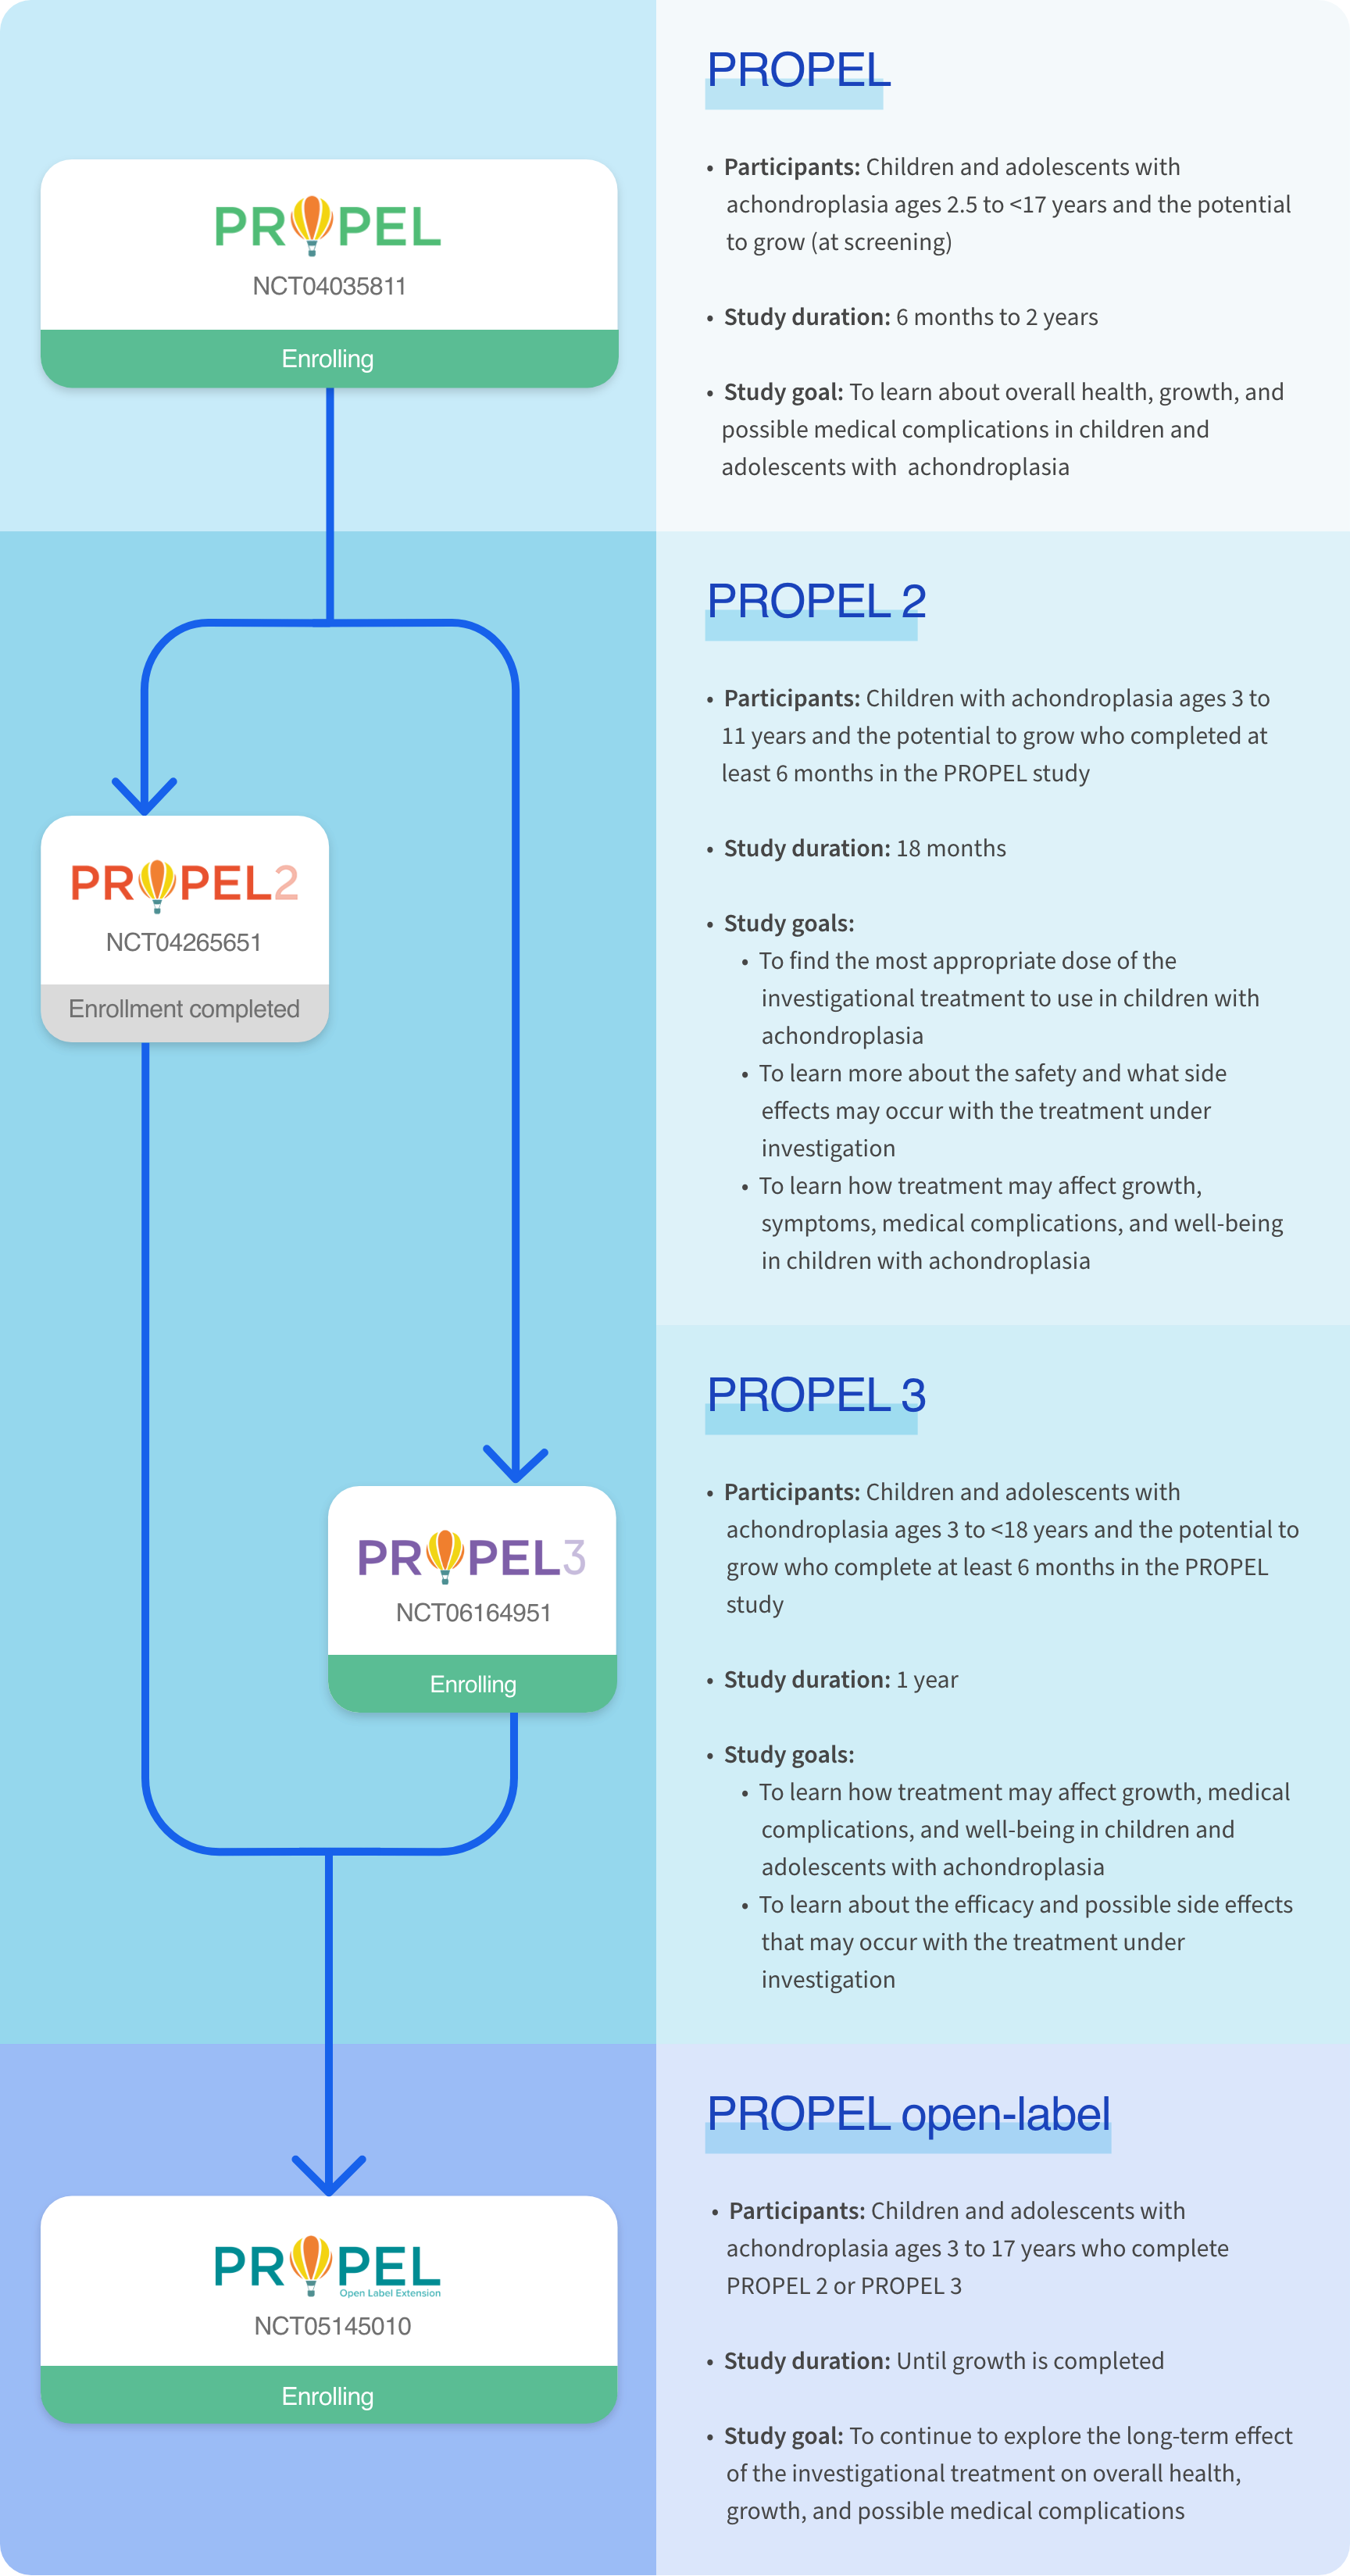 Detailed flowchart and summary of the PROPEL clinical study series for achondroplasia. The series starts with PROPEL, NCT0435811, which is currently enrolling participants aged 2.5 to <17 years. PROPEL has a study duration of 6 months to 2 years and has a study goal to learn about overall health, growth, and potential medical complications in children and adolescents with achondroplasia. This leads into PROPEL2, NCT04265651, with enrollment completed and a study duration of 18 months. PROPEL 2 is focused on children aged 3 to 11 years, aiming to find the most appropriate dose of treatment, safety, and how treatment may affect growth, medical complications, and well-being. Parallel to this is PROPEL 3, NCT06164951, still enrolling, for children and adolescents aged 3 to <18 years, with goals to understand treatment effects on growth, medical complications, and well-being, with a study duration of 1 year. Both PROPEL 2 and PROPEL 3 funnel into PROPEL open-label extension, NCT0514510, enrolling children and adolescents aged 3 to 17 years who completed PROP2 or PROP3, with the goal to explore long-term effects of treatment on overall health, growth, and possible medical complications. The study duration for PROPEL 3 is until growth is complete.